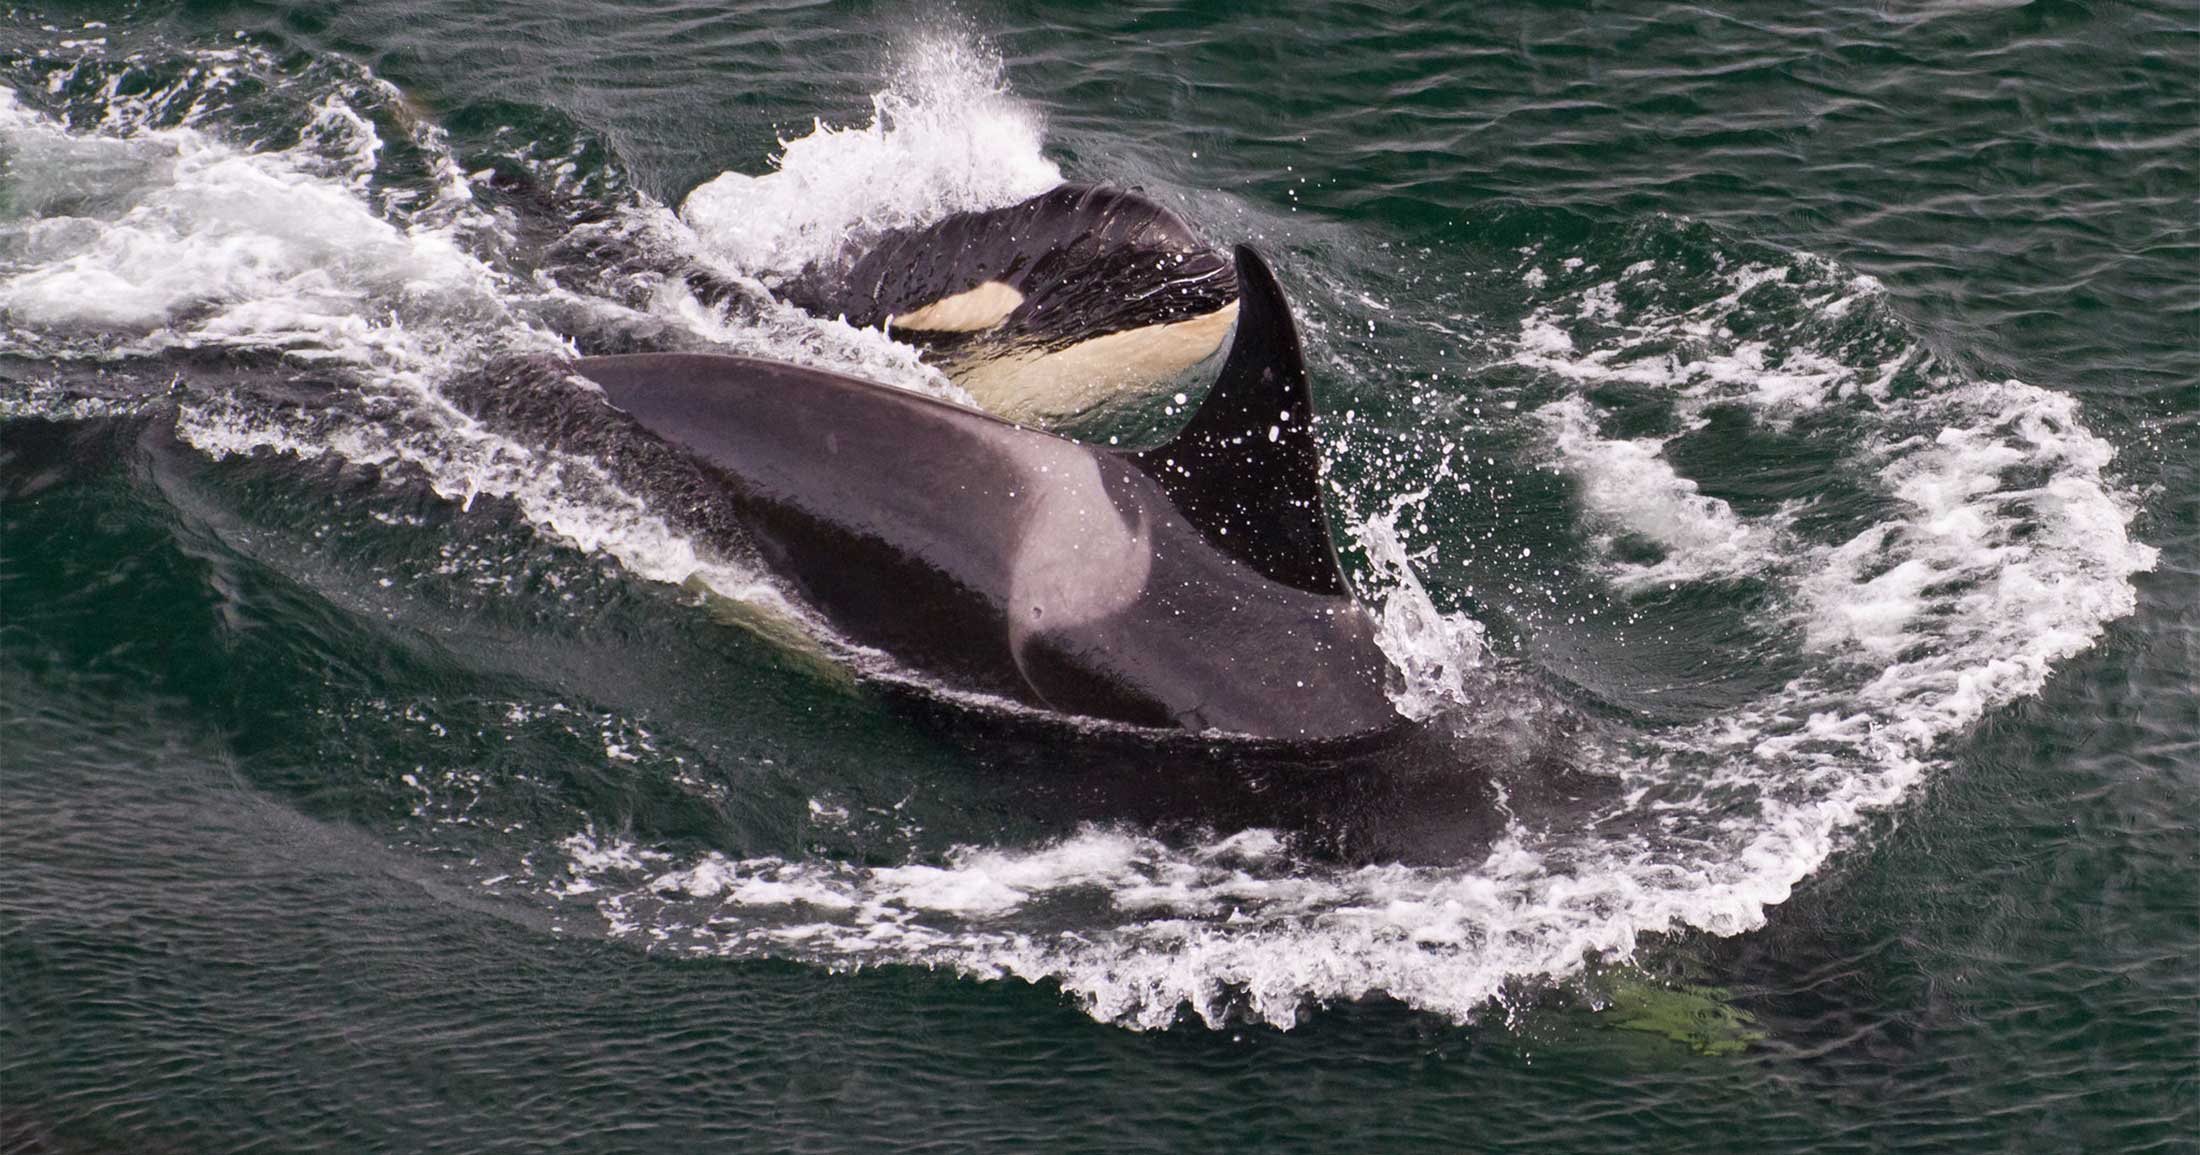 Two killer whales swimming next to each other.